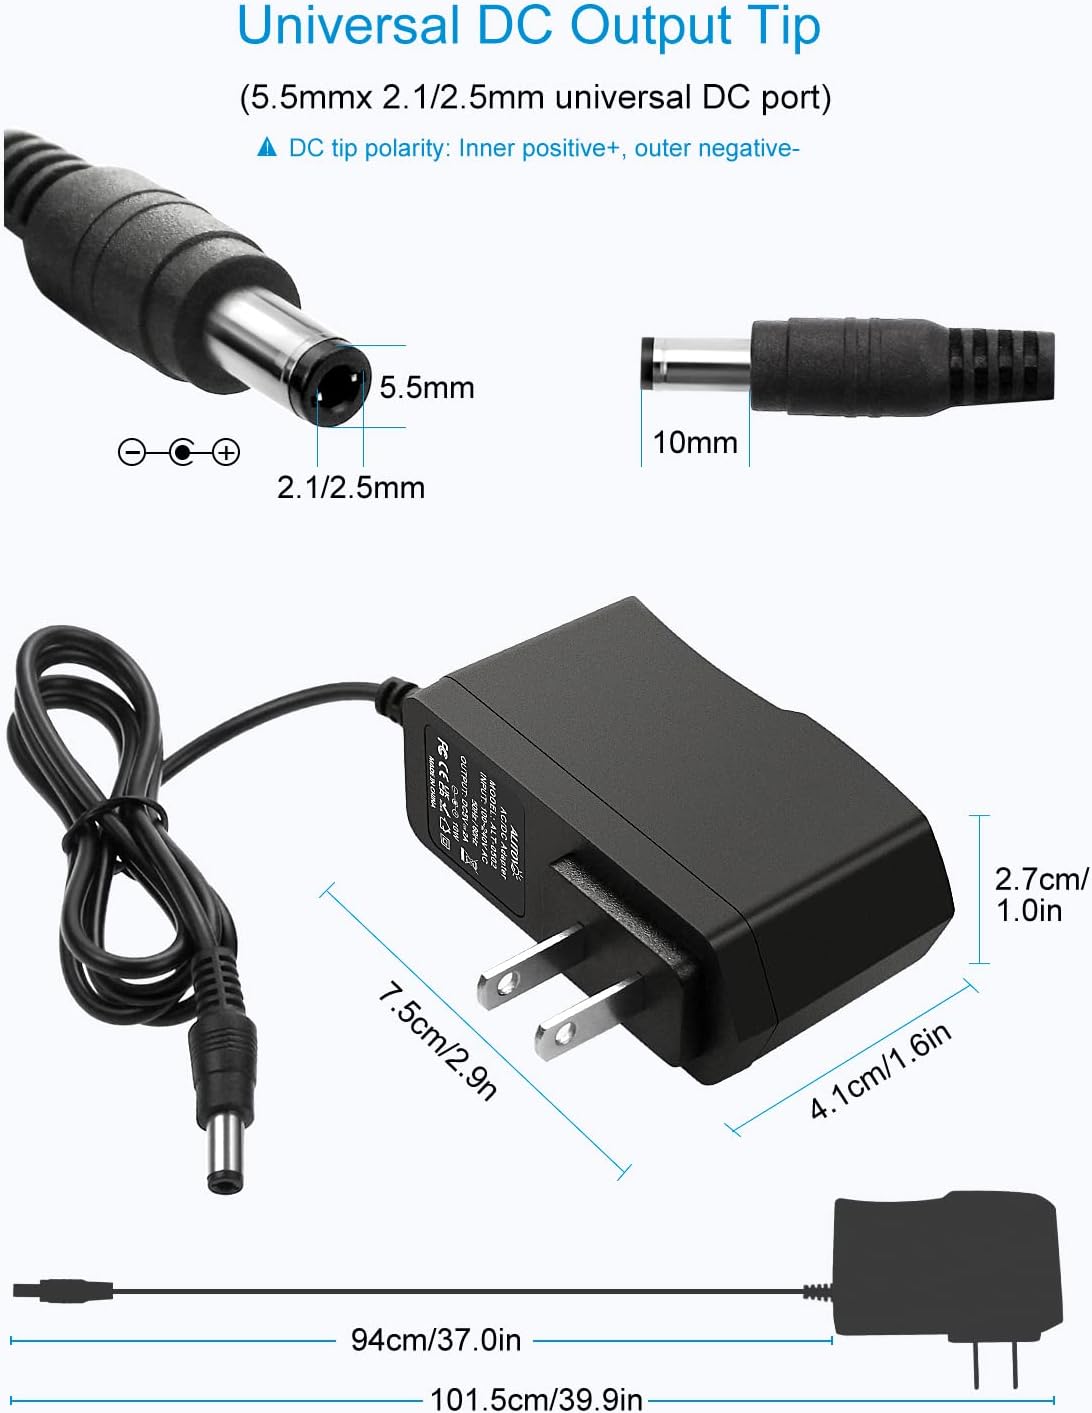 ALITOVE 5V 2A Power Adapter - 5V Power Supply with Tips - ALITOVE-Add Vivid Color to Life